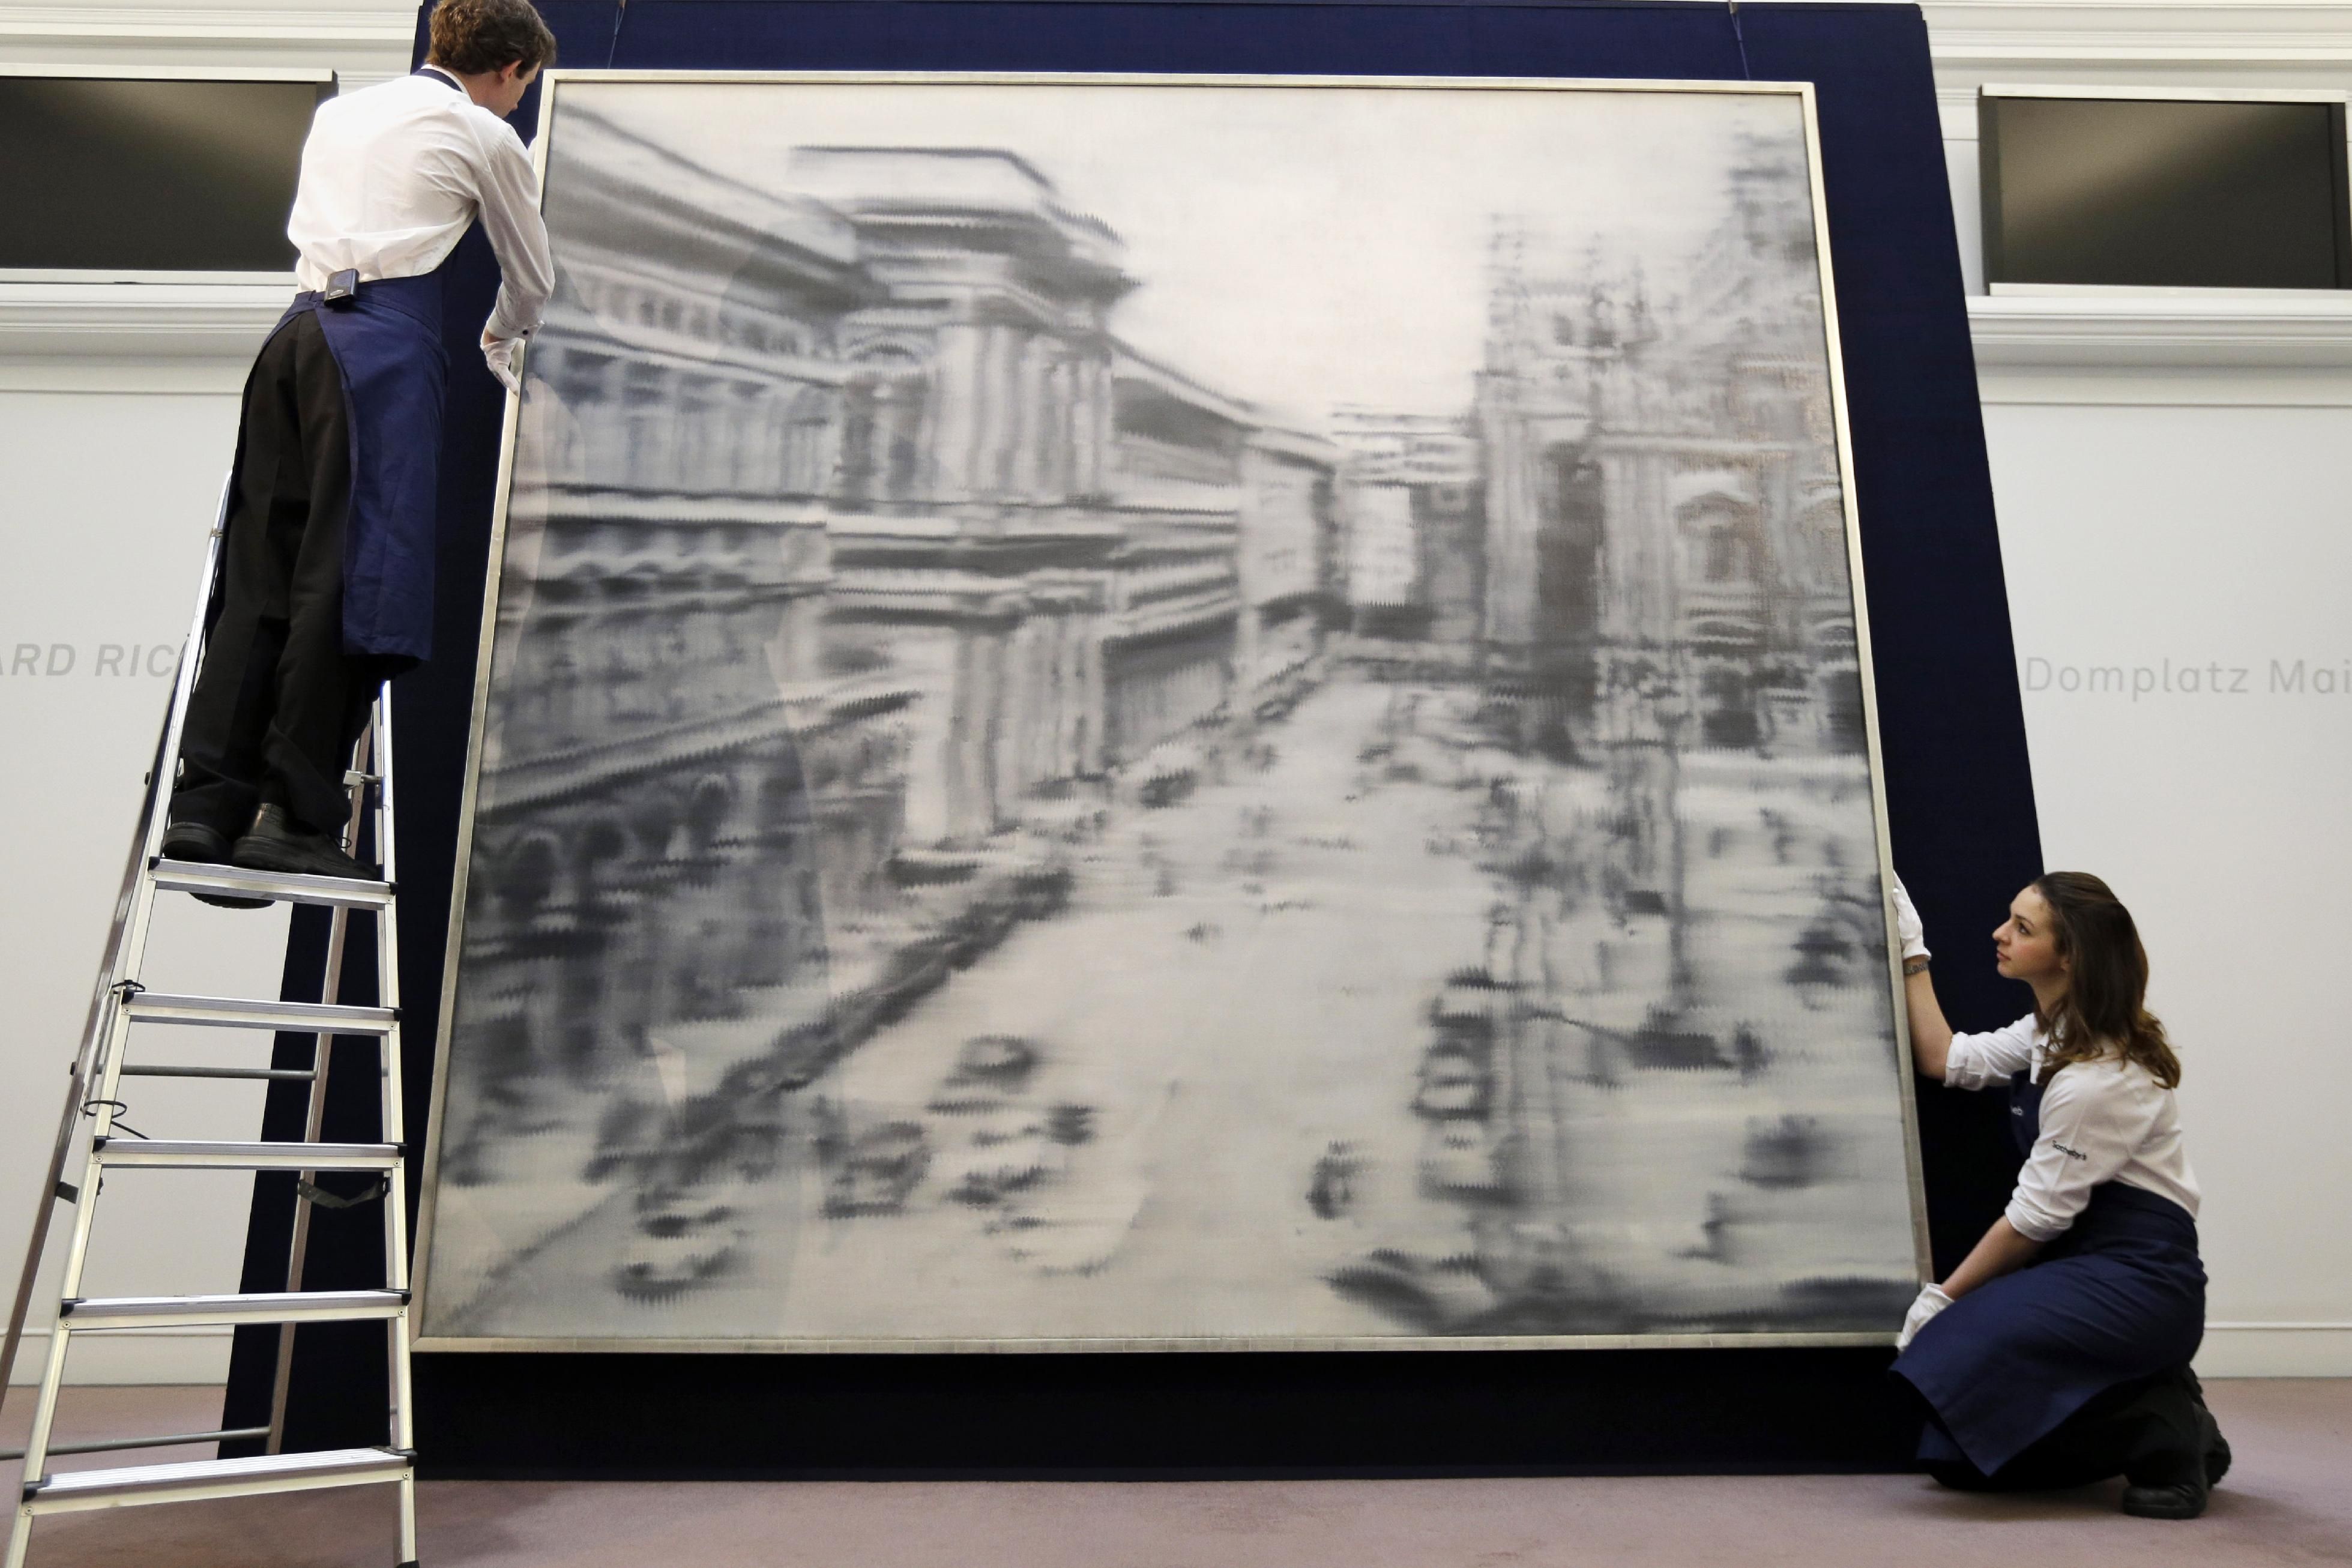 Richter painting sells for $37 million in NYC